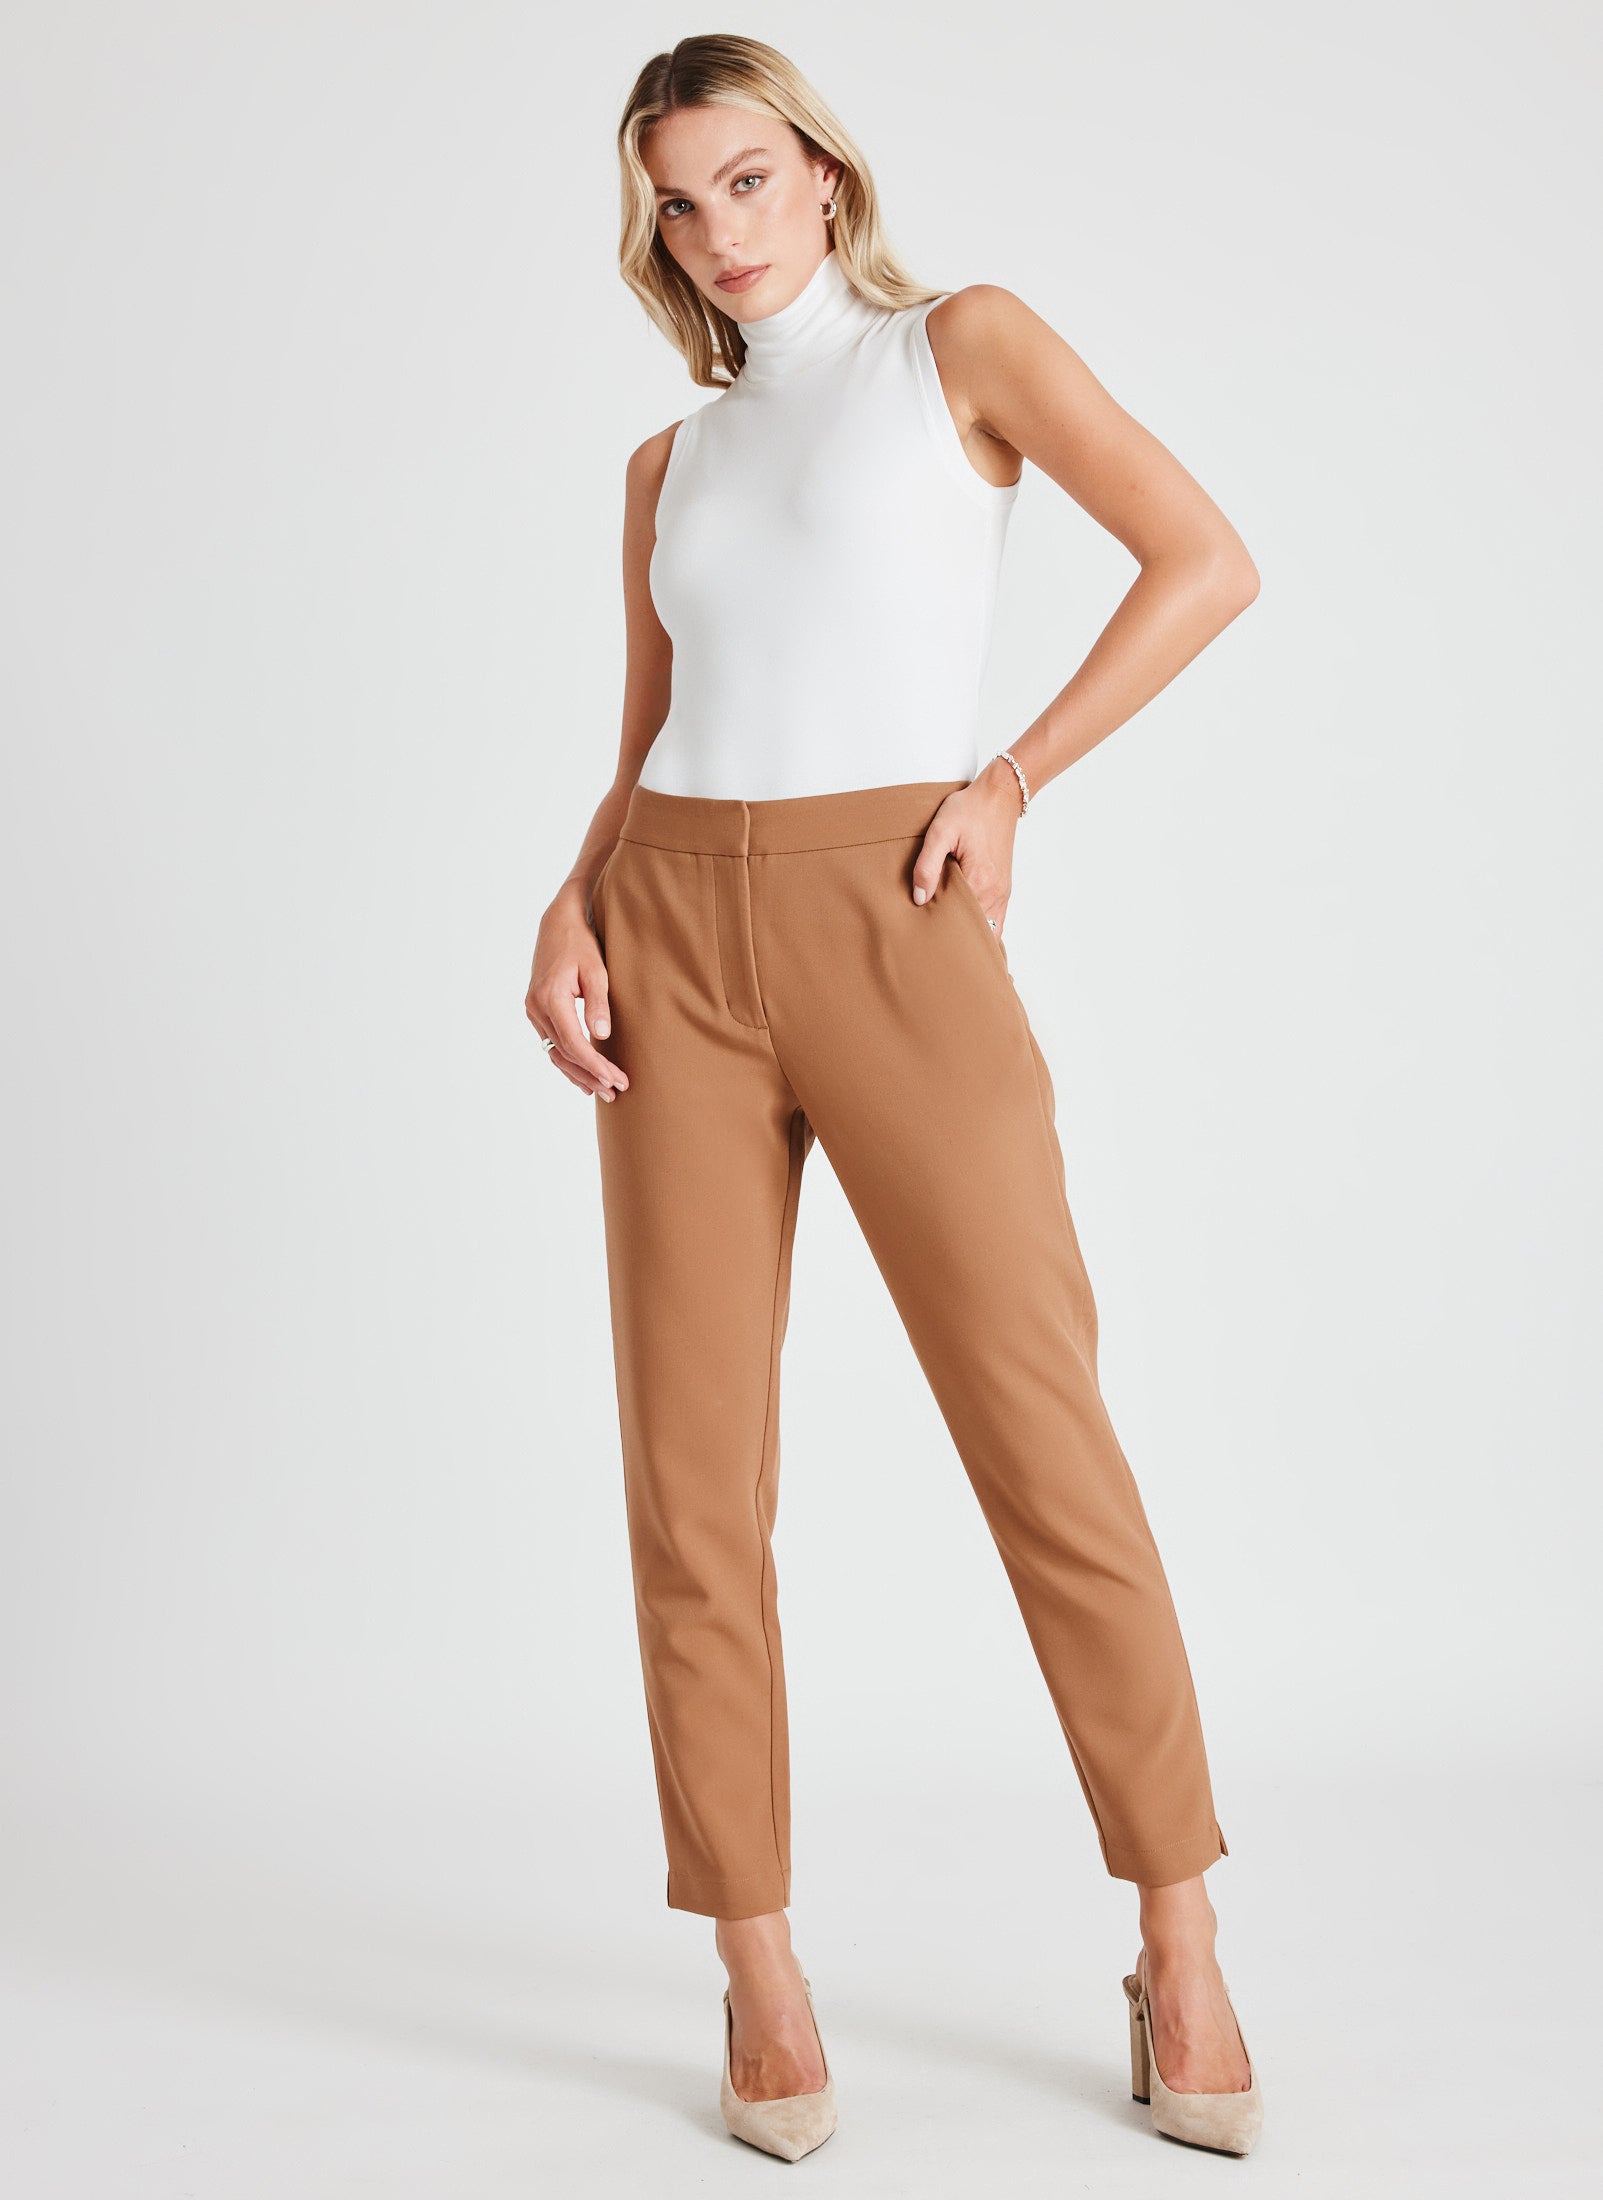 Kit and Ace — Adelaide Slim Pants